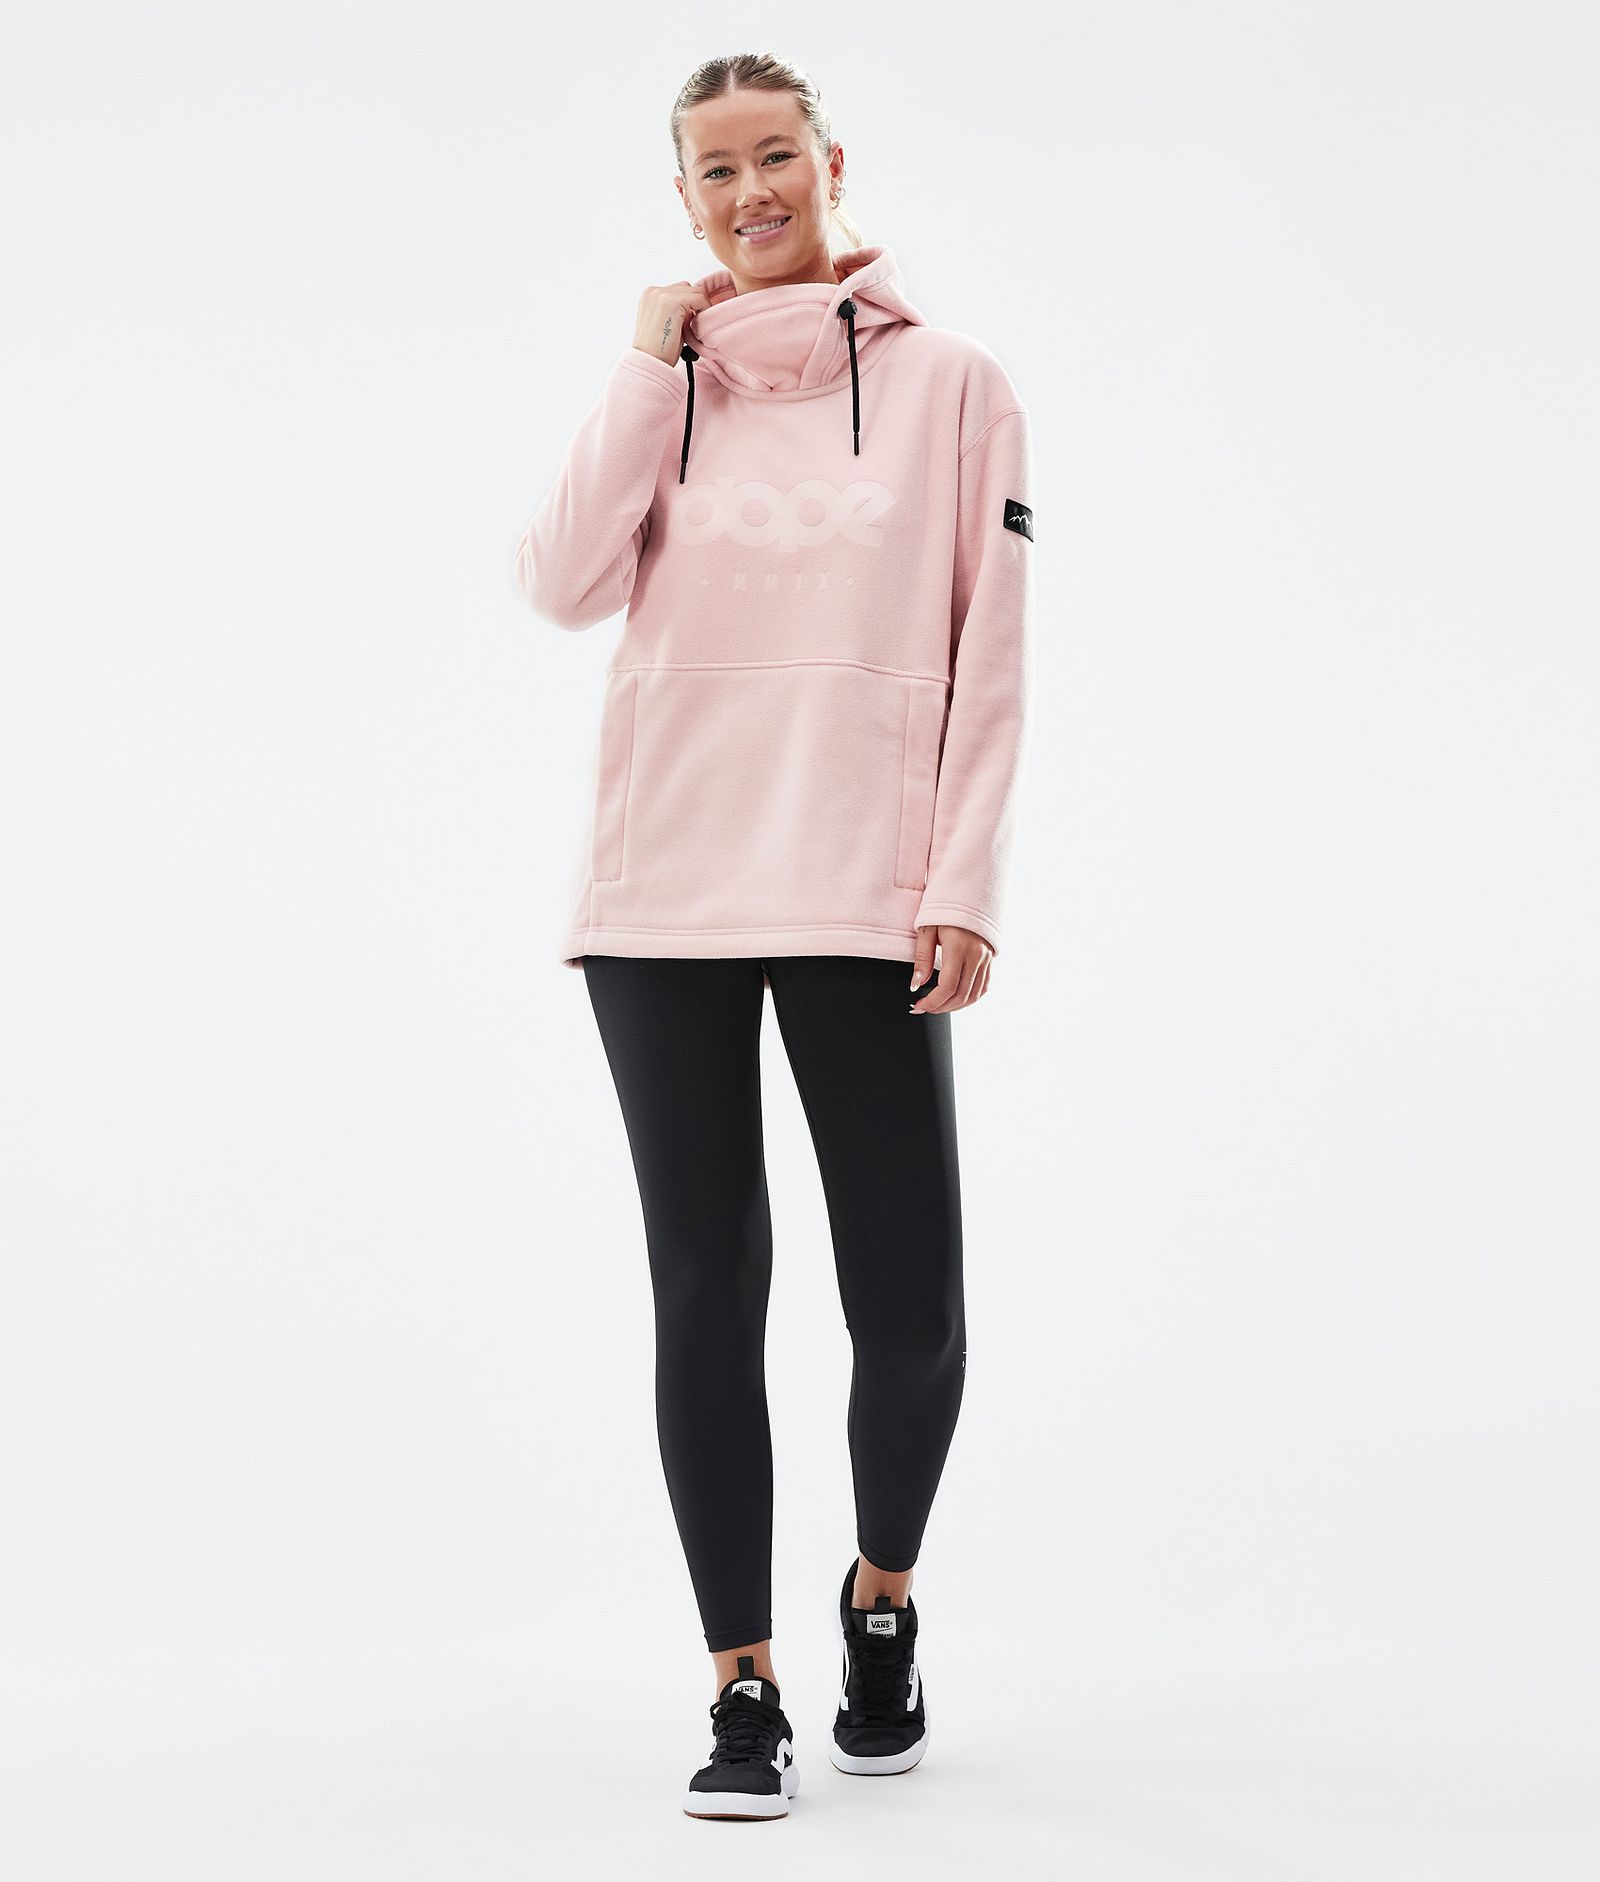 Dope Cozy II W Pull Polaire Femme Soft Pink